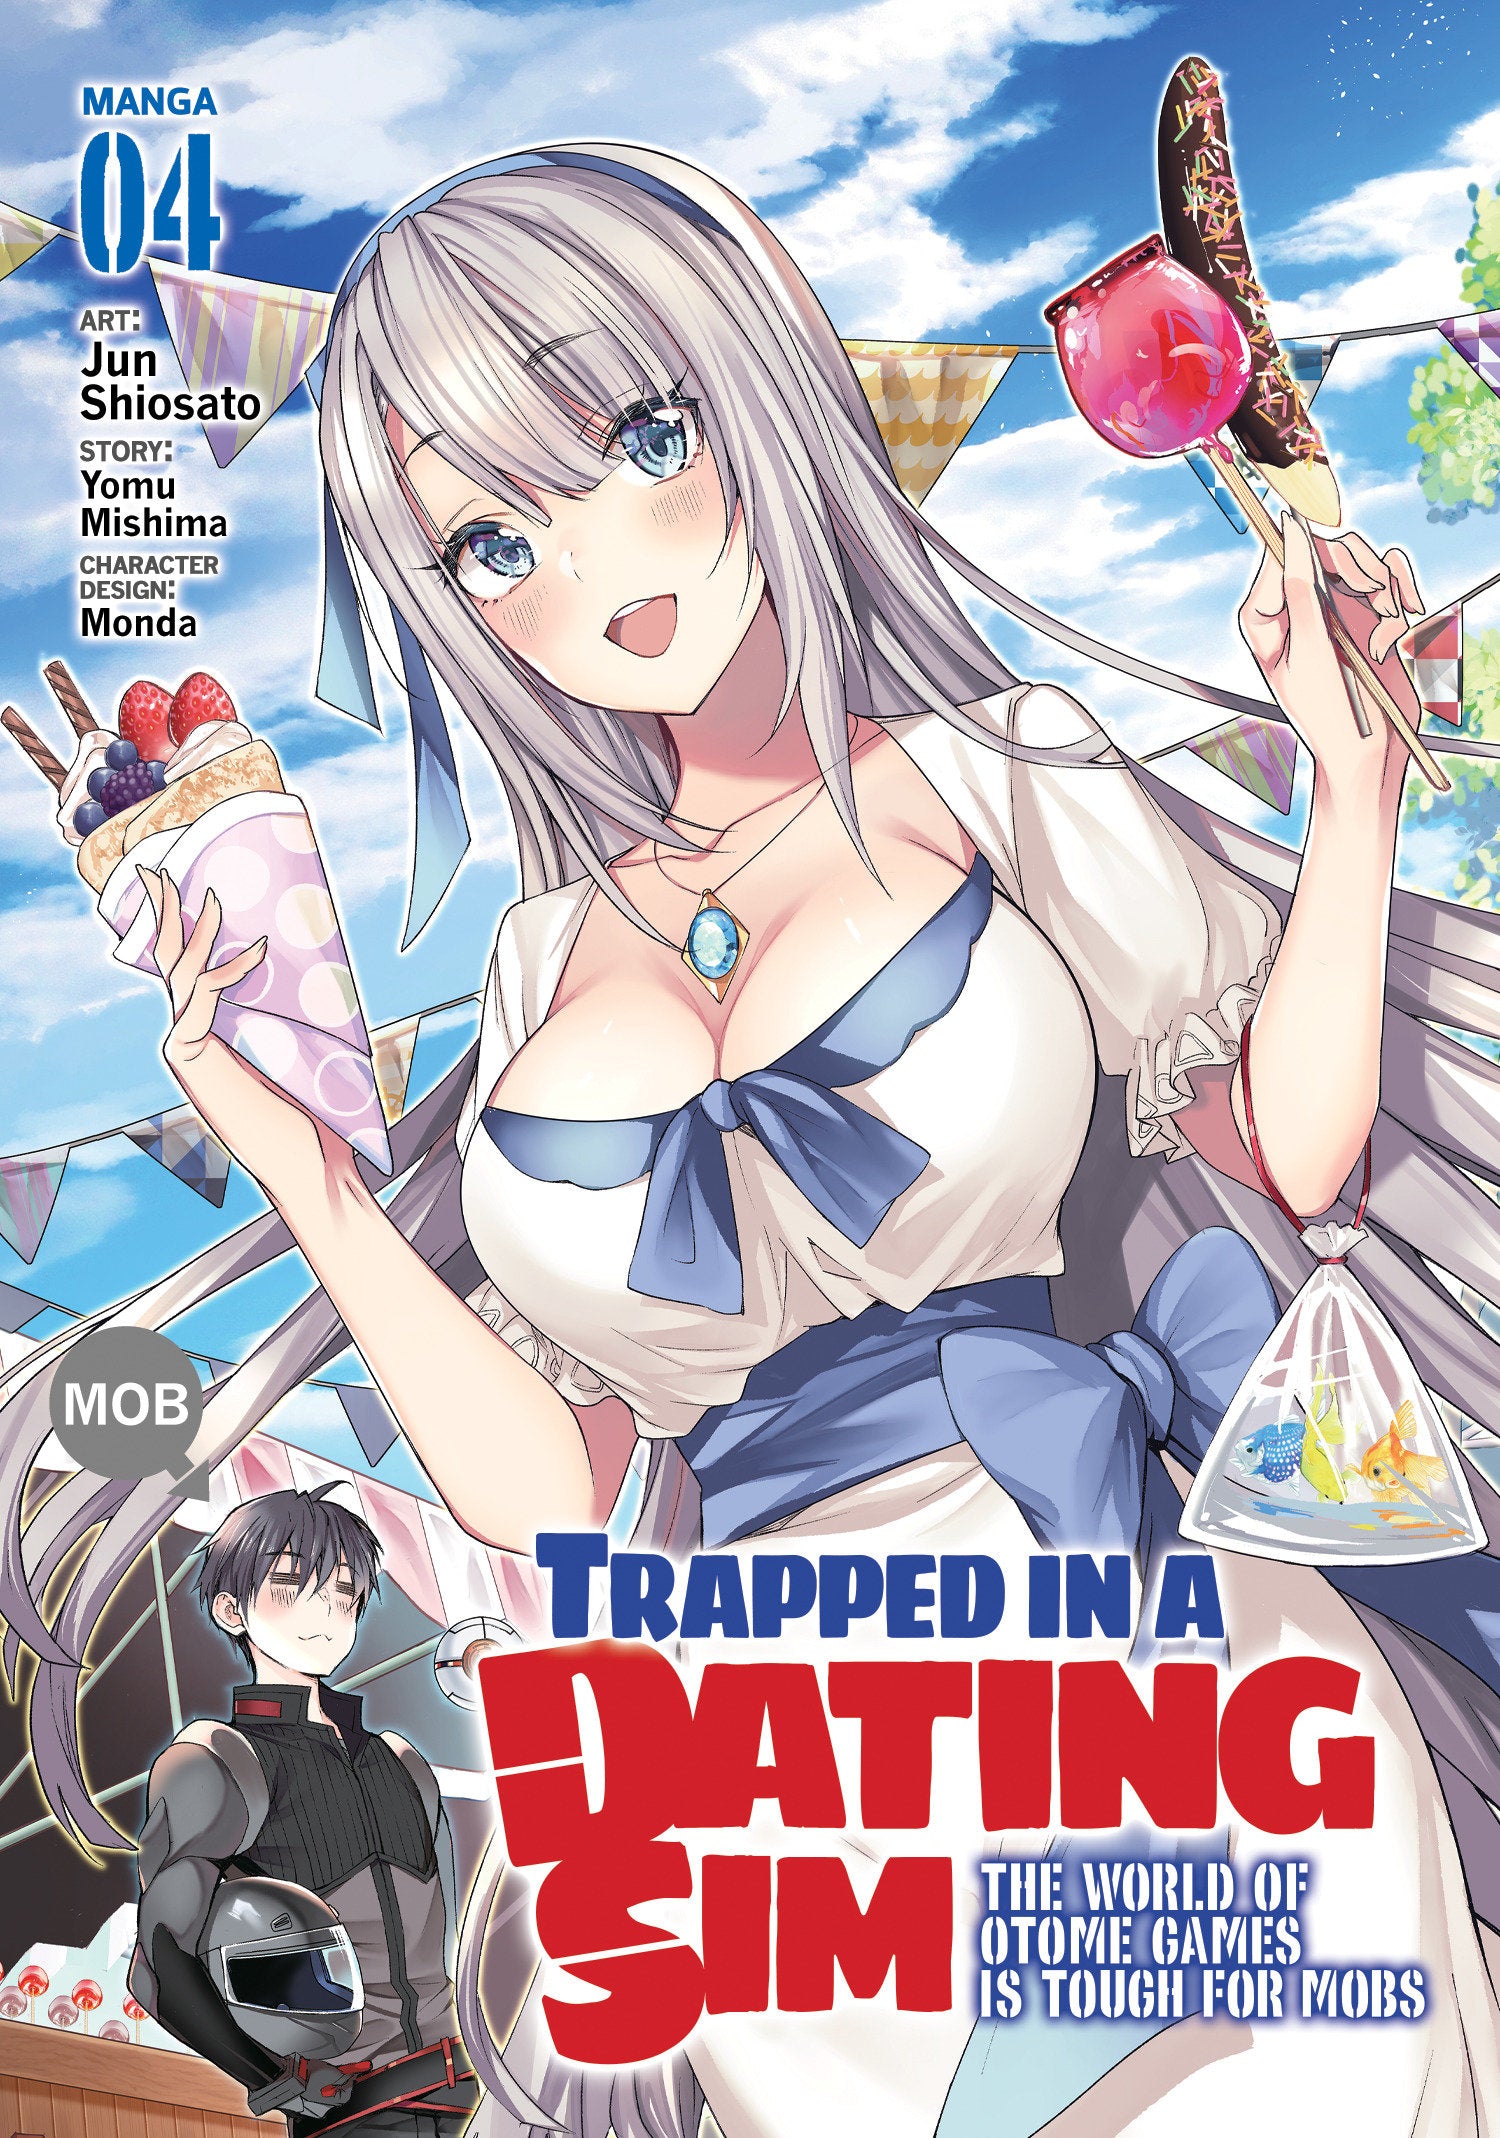 Trapped in a Dating Sim: The World of Otome Games Is Tough for Mobs (Manga) Vol. 04